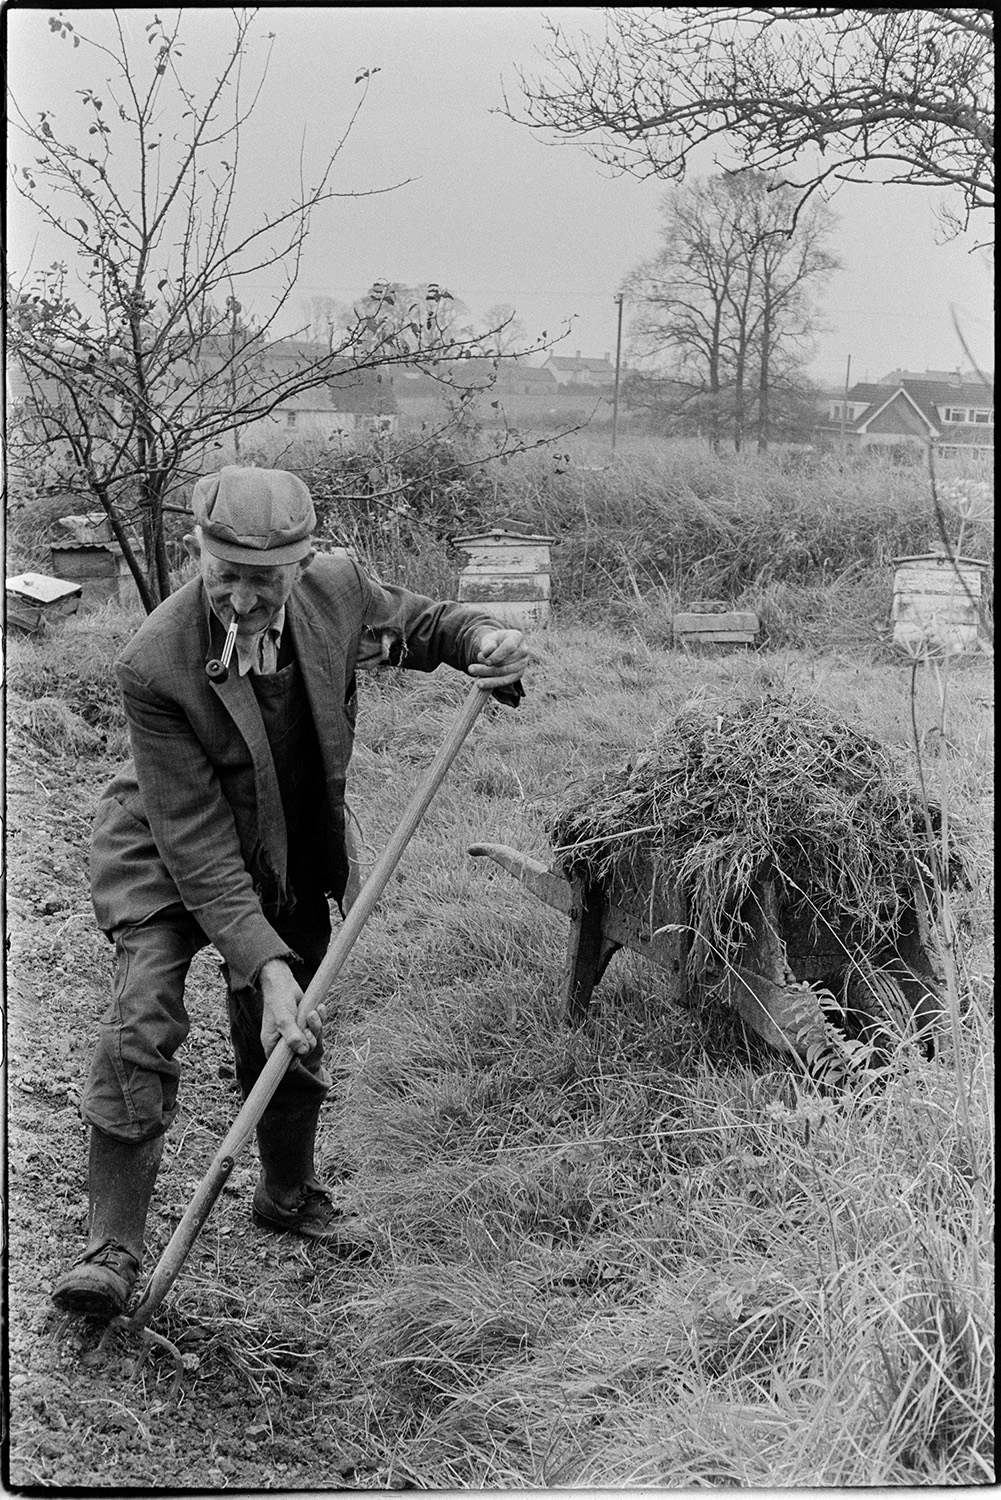 Farmer spreading muck on his garden, wheelbarrow. 
[Gordon Sanders spreading manure from a wheelbarrow onto his garden, using a fork, at Reynards Park, Ashreigney. He is smoking a pipe. Beehives are visible in the background.]